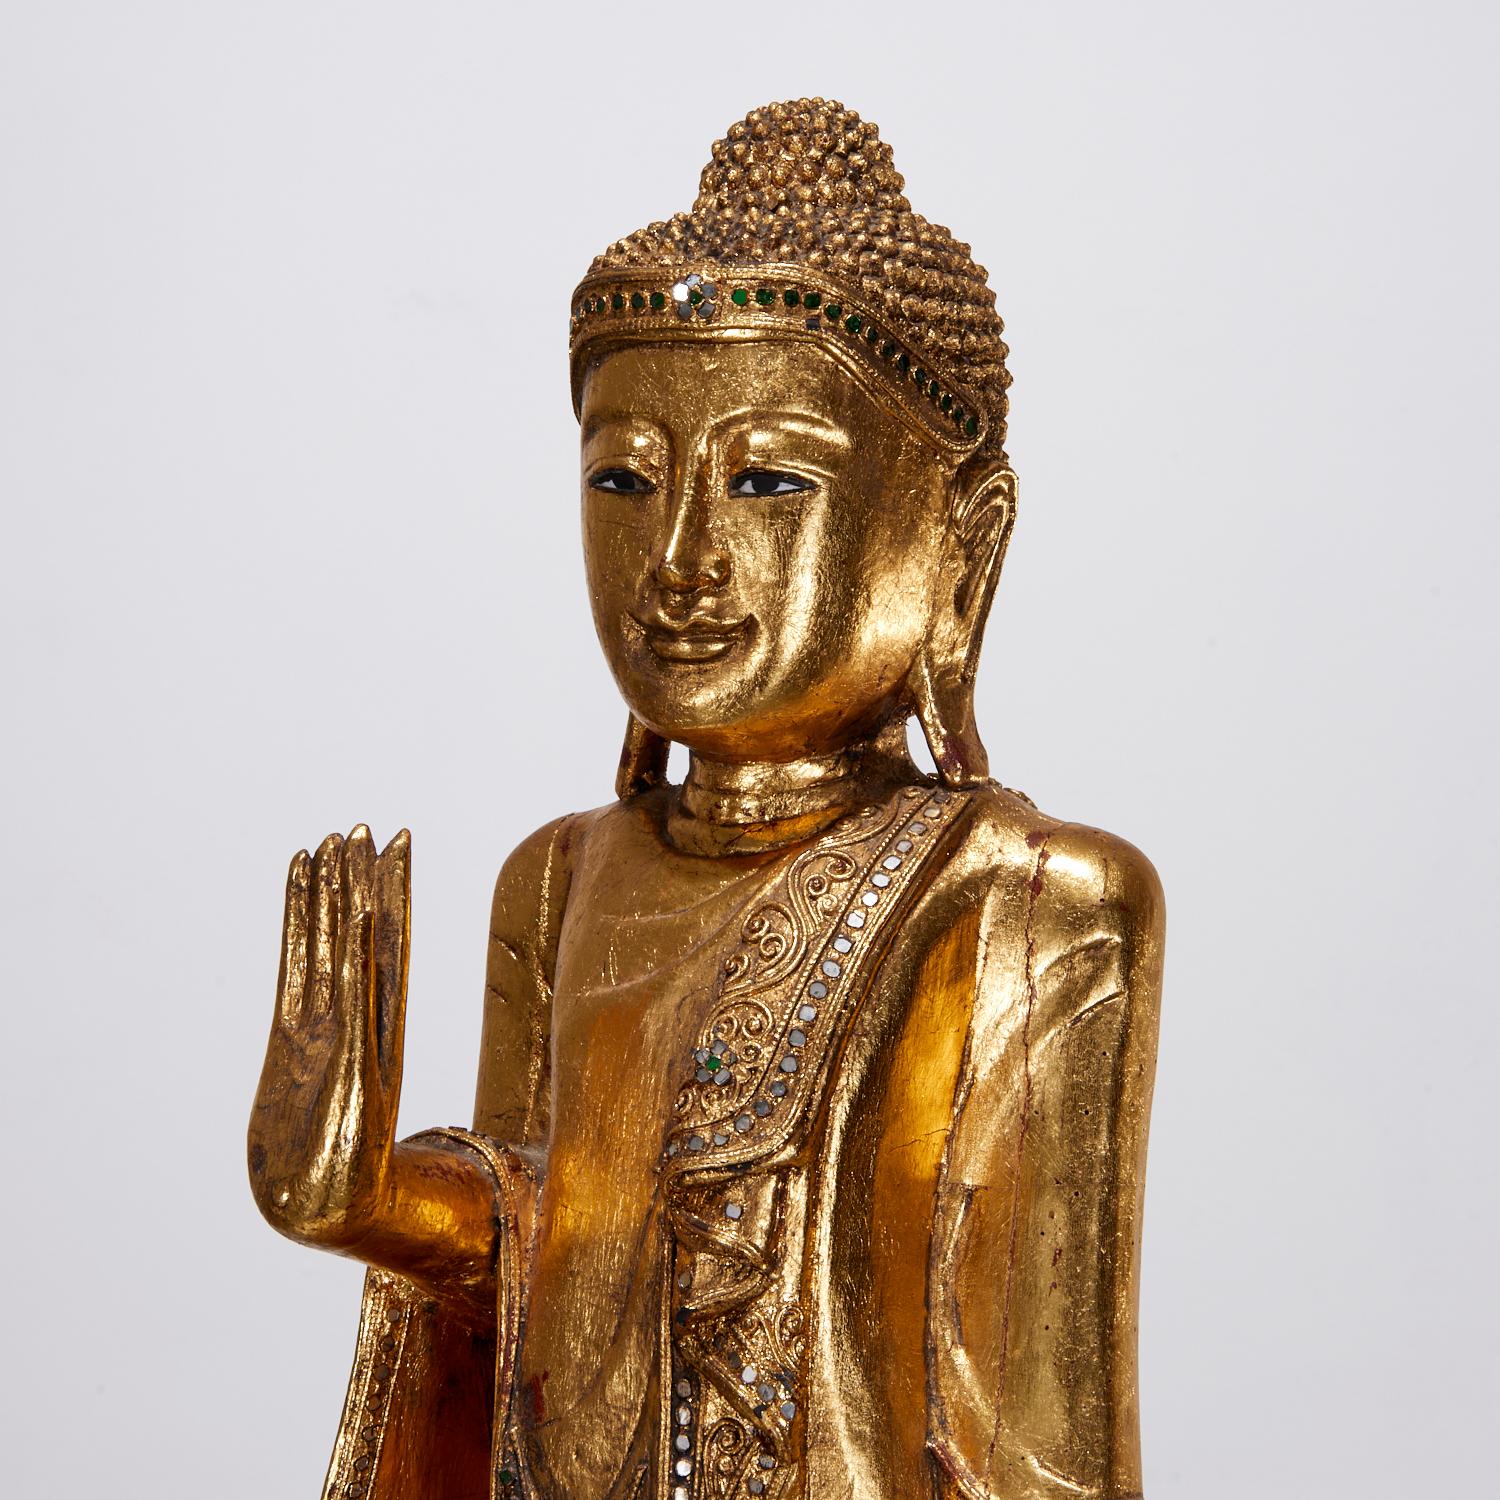 A lovely vintage 20th c., carved and giltwood standing Burmese Mandalay Buddha, with green and clear mirrored inlaid details, on wooden stand.

The Buddha is depicted standing with a palm held up facing outward signifying the act of teaching or